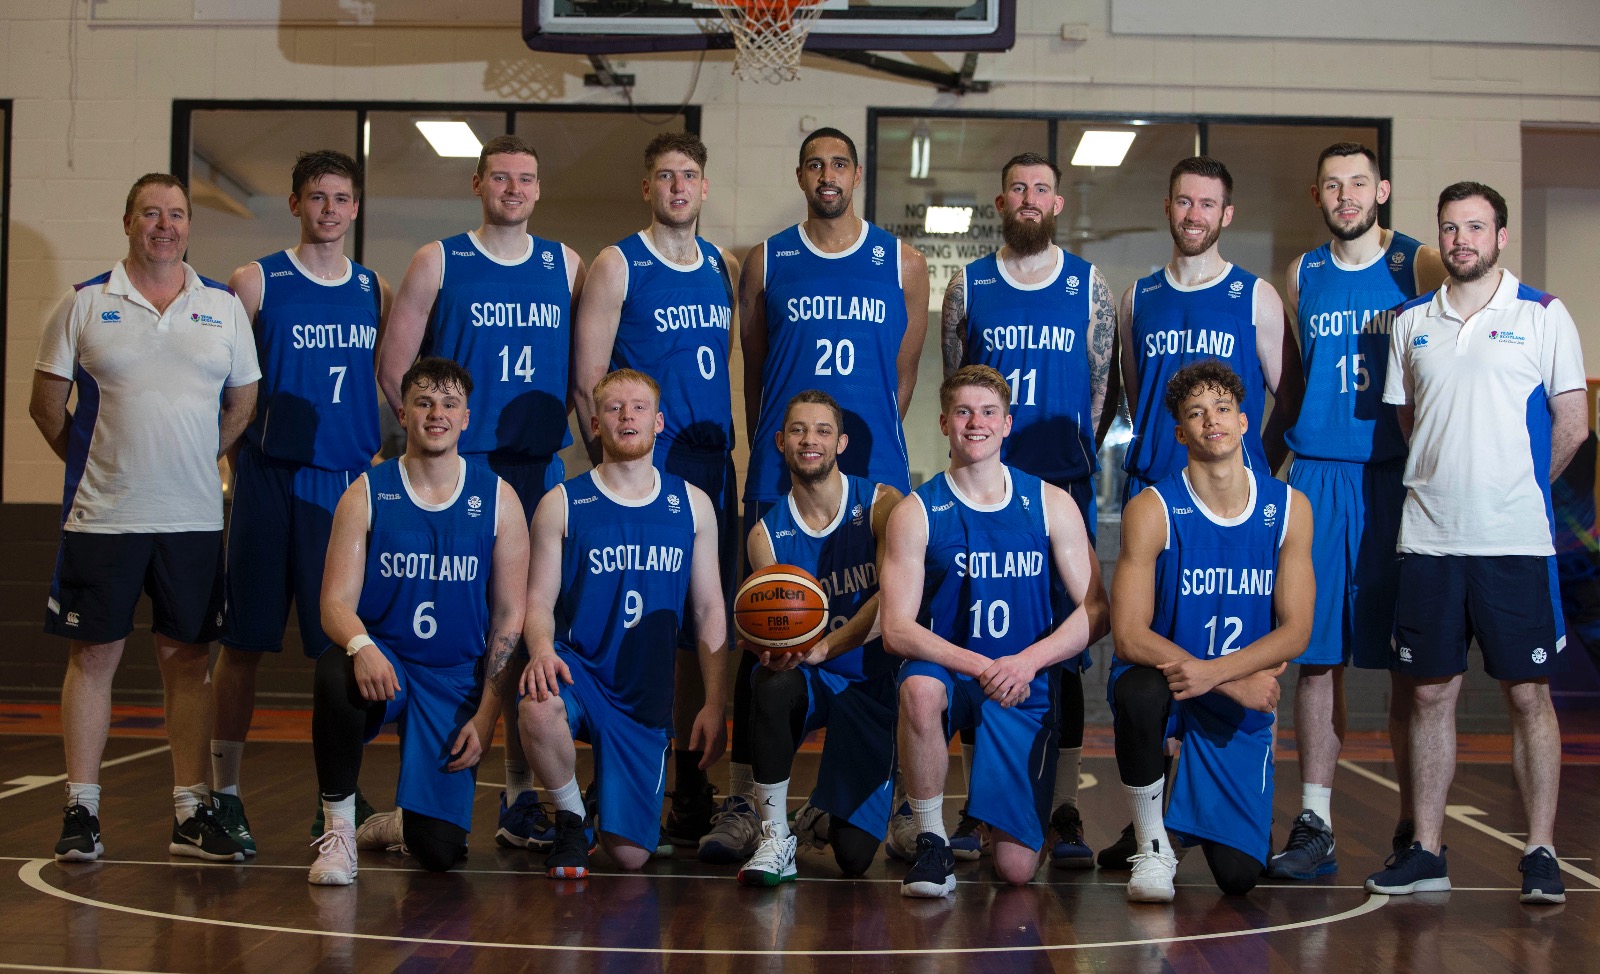 Scotland take victory against England in first game at Gold Coast – Basketball Scotland1600 x 974